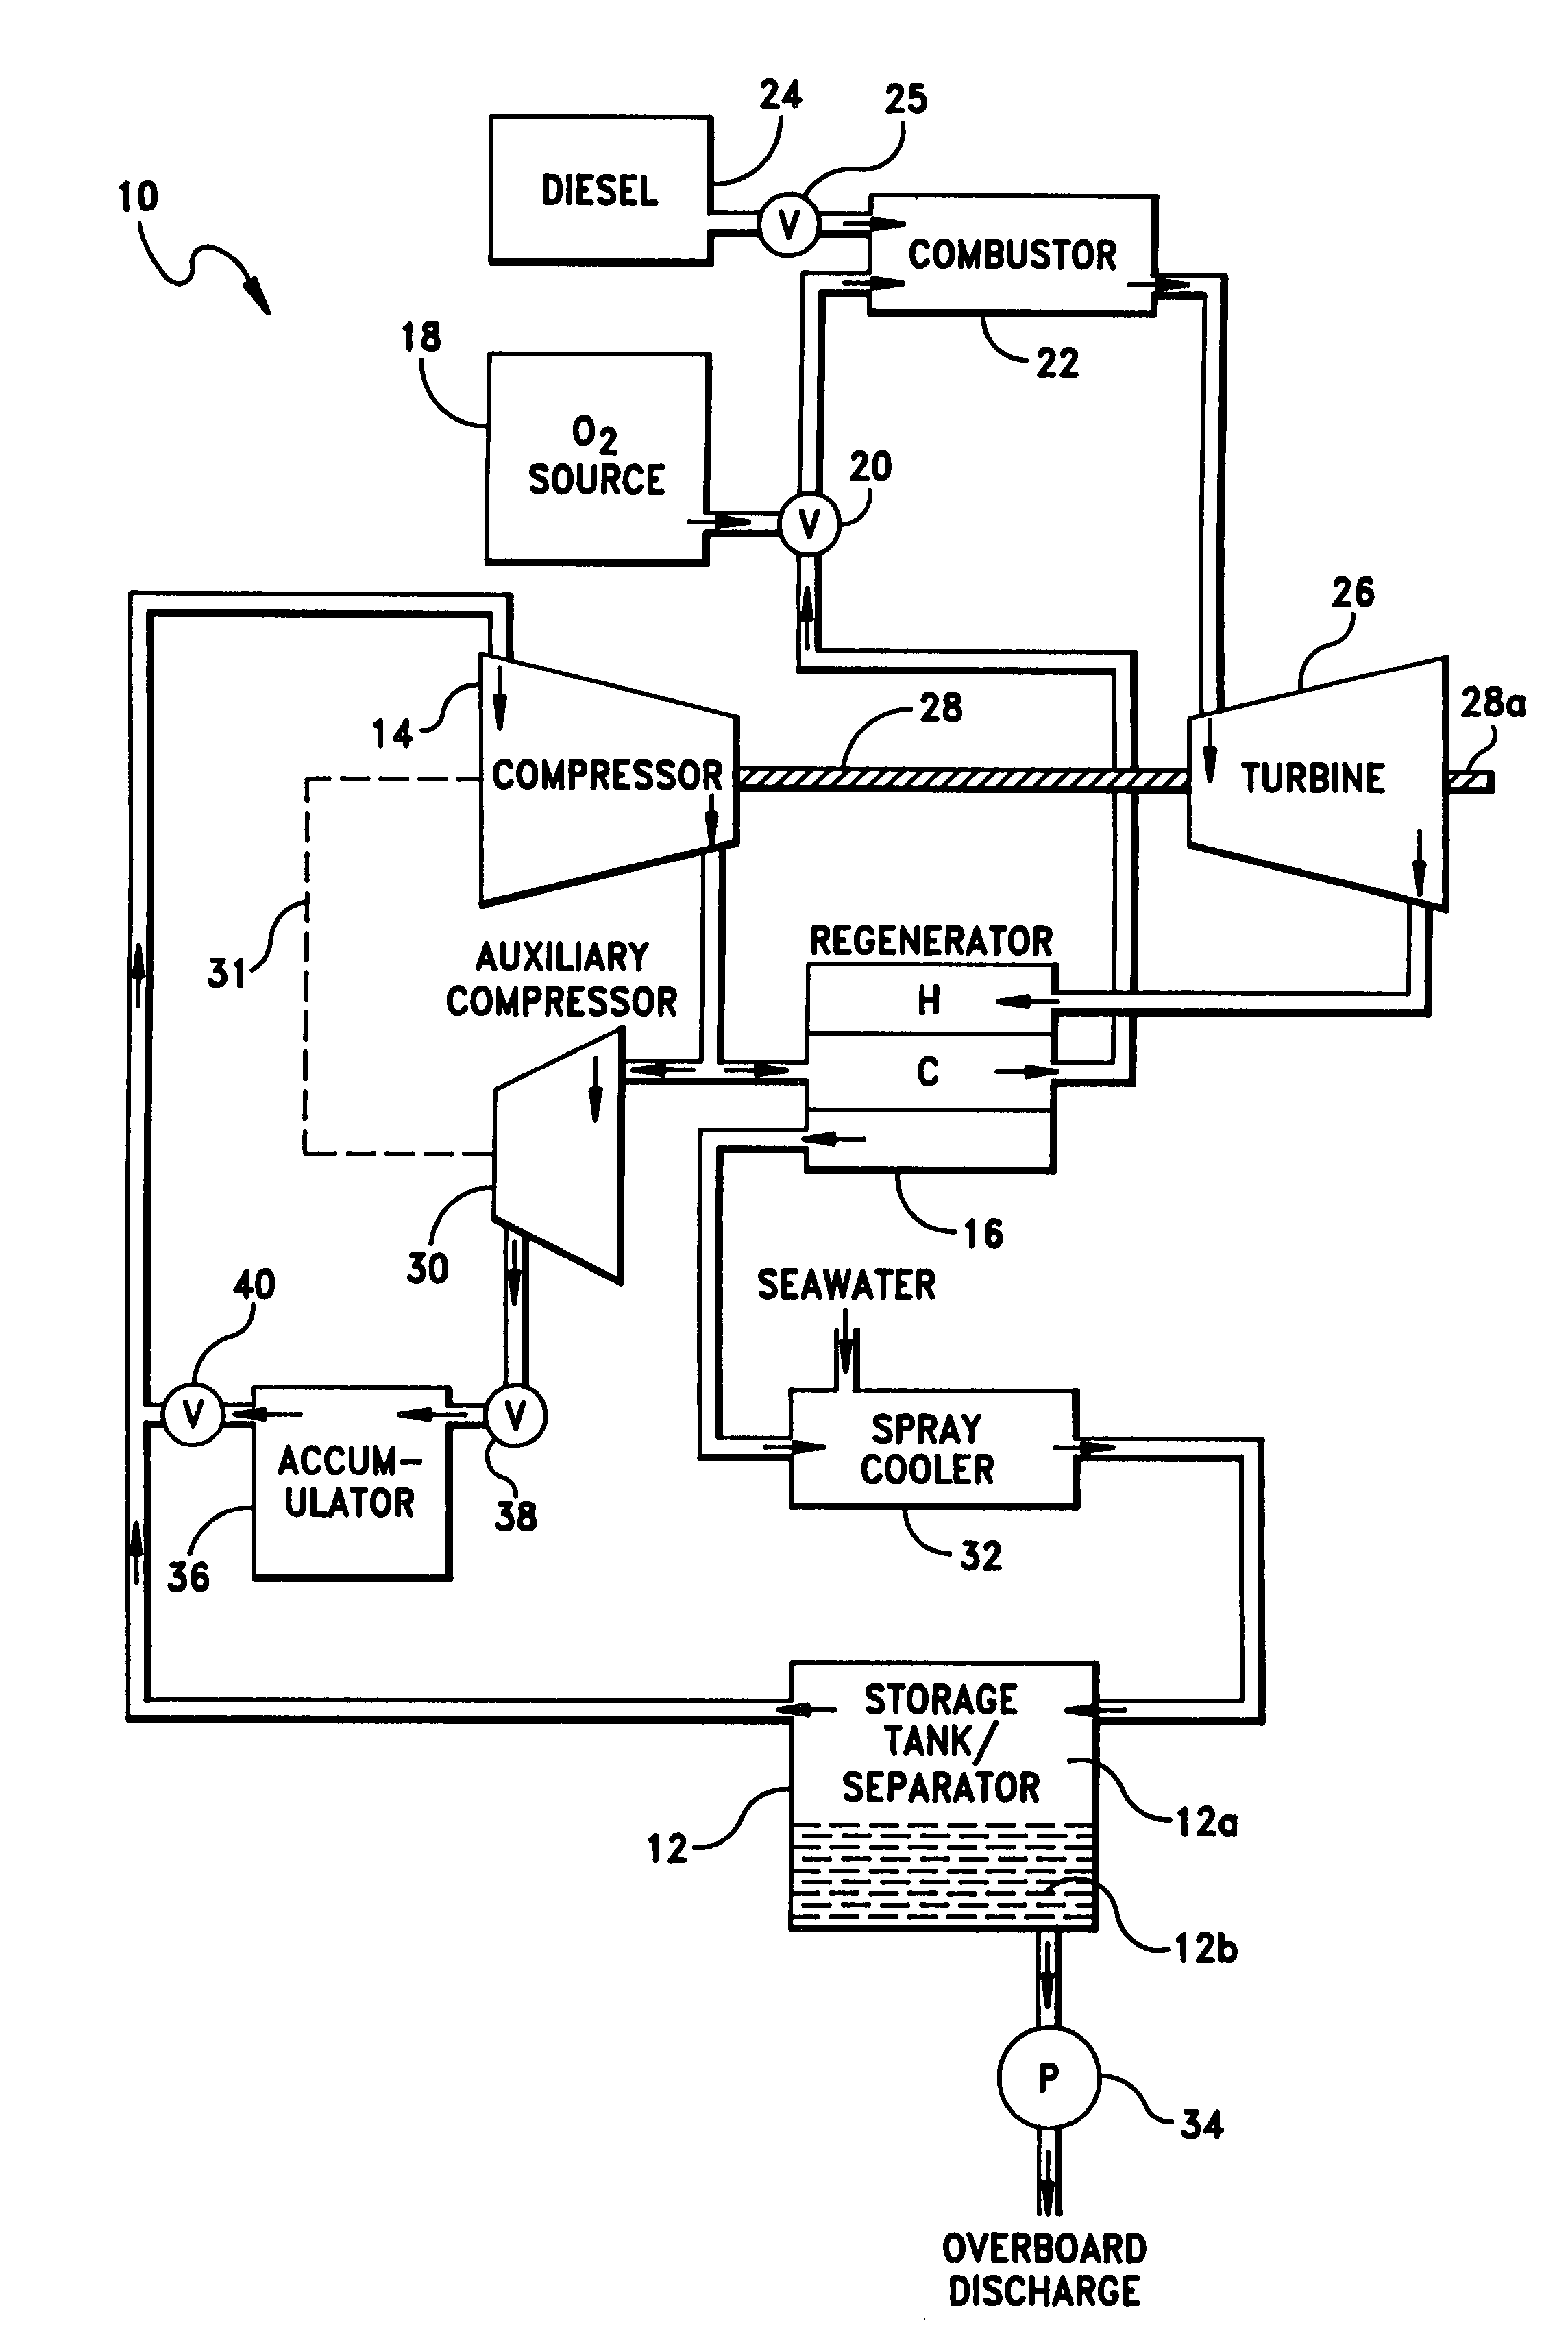 Semiclosed Brayton cycle power system with direct heat transfer